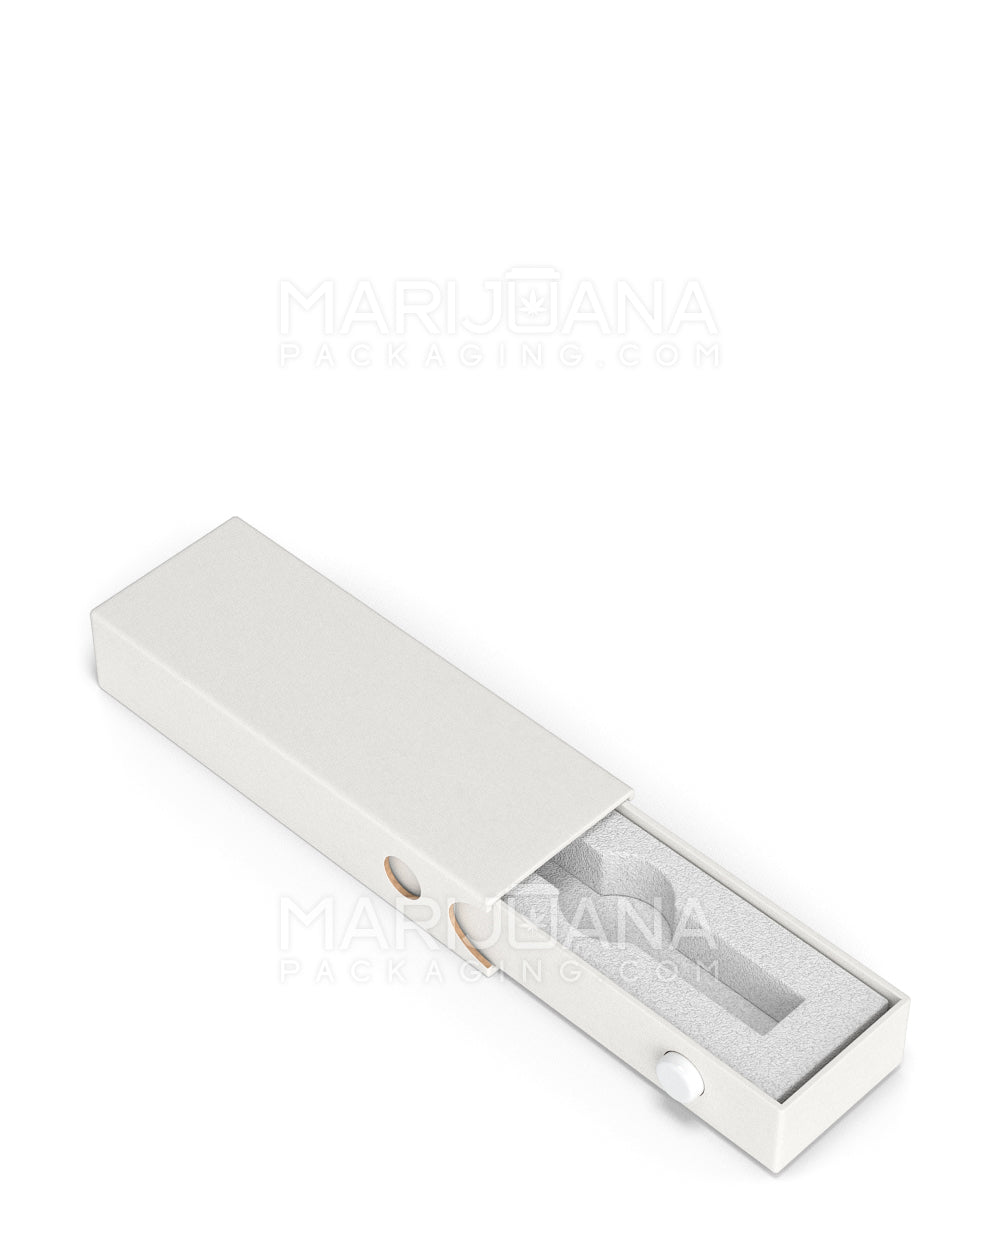 Child Resistant & Sustainable | 100% Recyclable Slim Cardboard Vape Cartridge Box w/ Press Button & Foam Insert | 100mm - White - 100 Count - 3